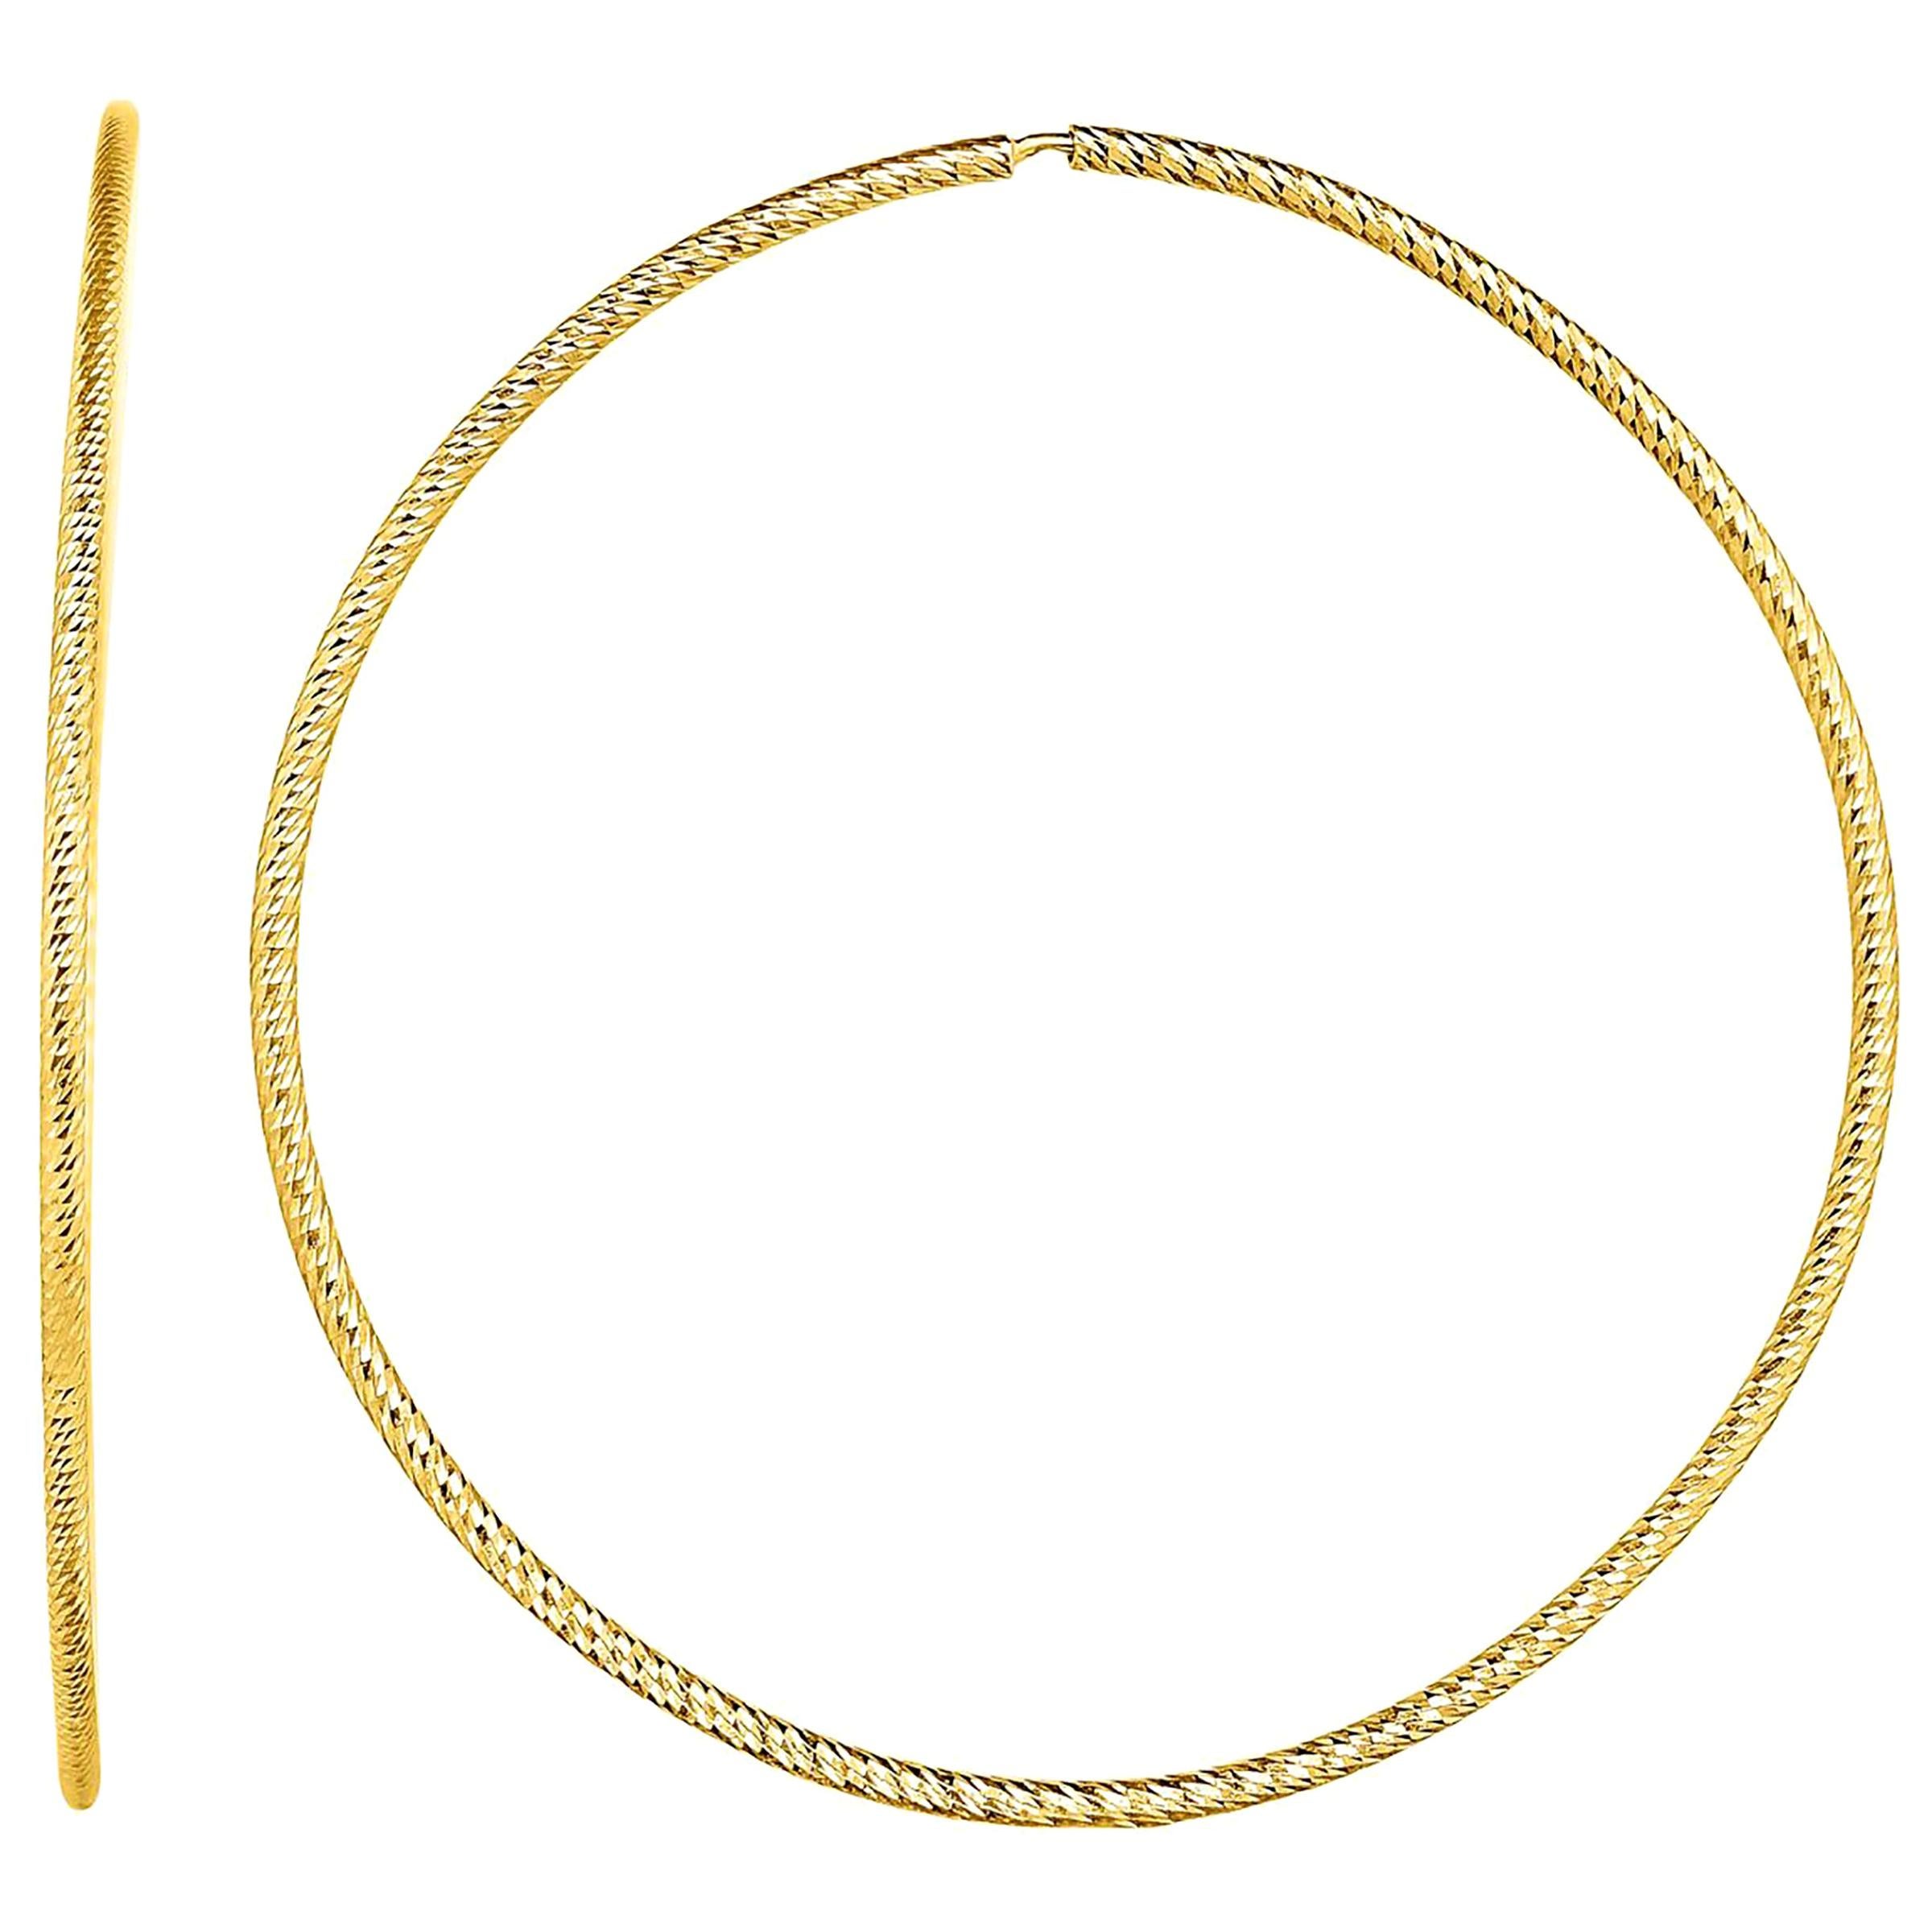 Large Textured Yellow Gold Hoop Earrings